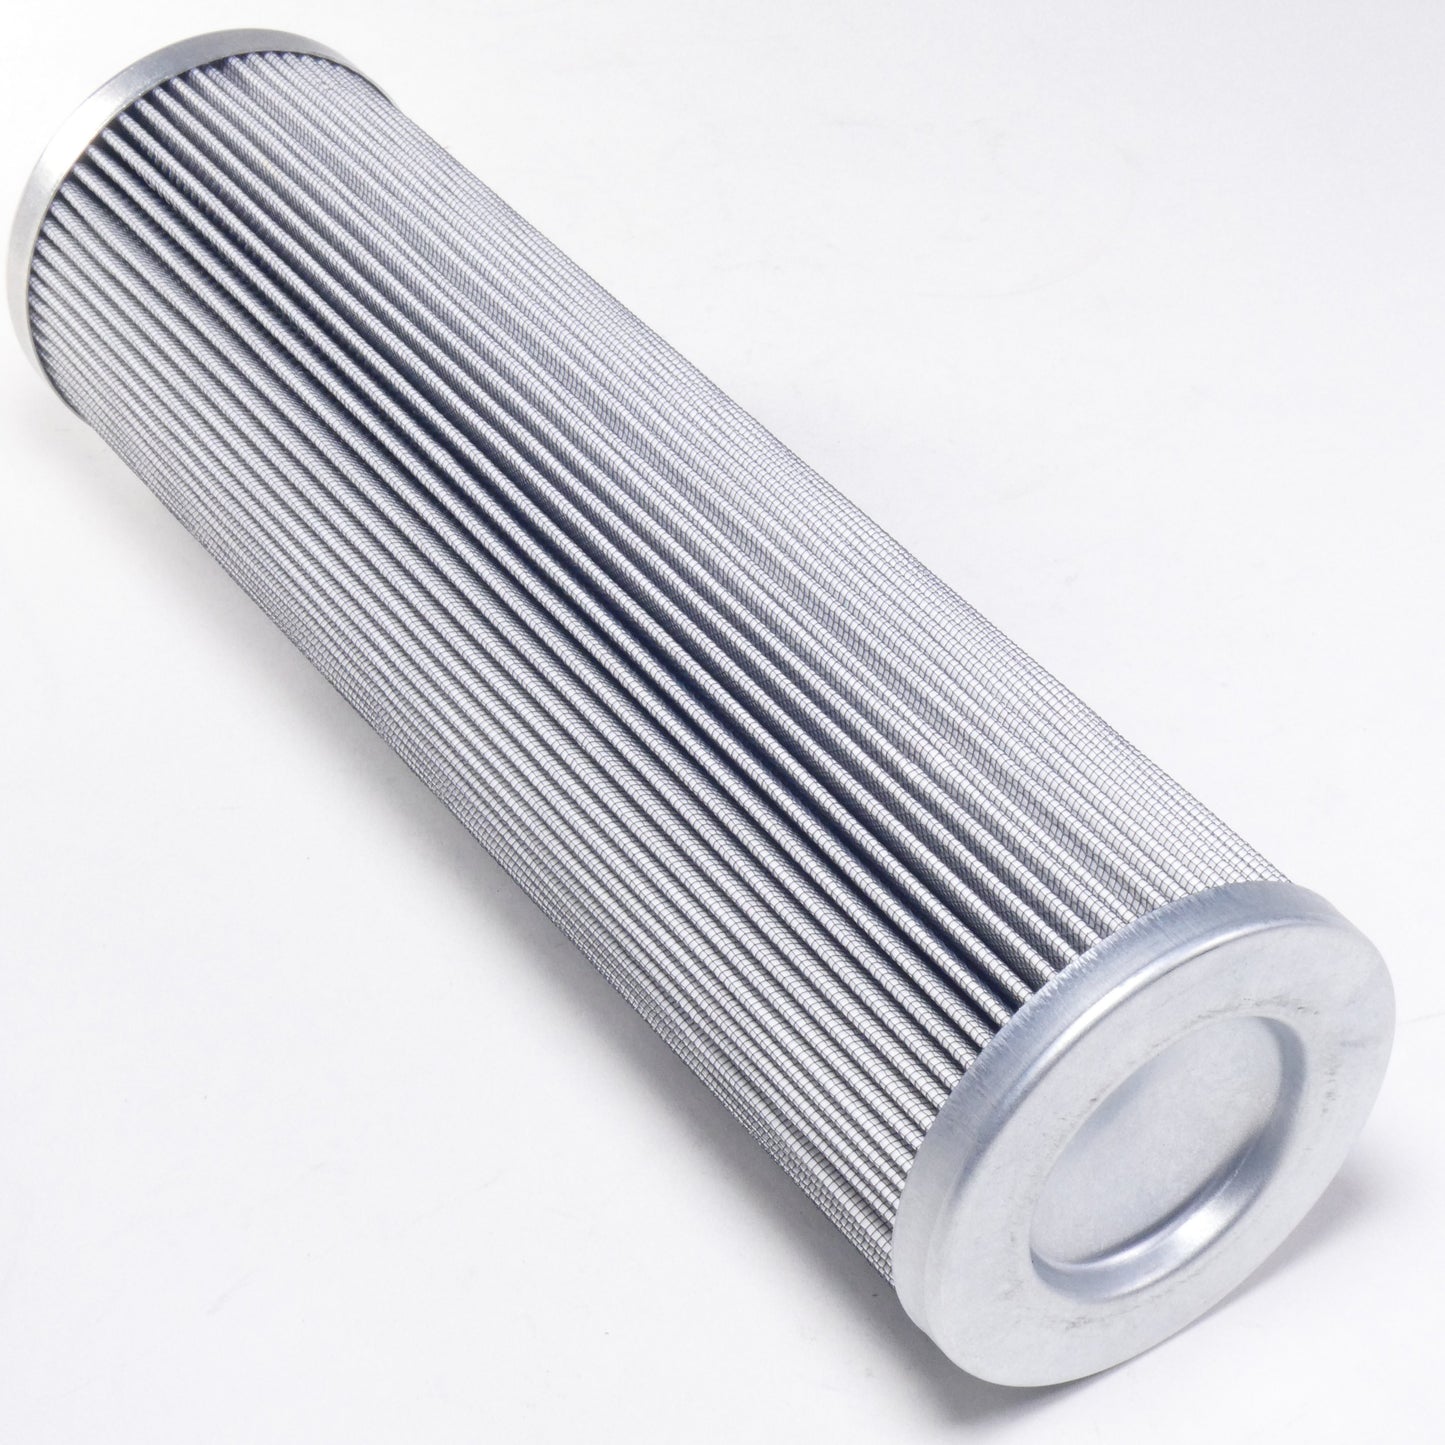 Hydrafil Replacement Filter Element for Separation Technologies 3890DGEB13